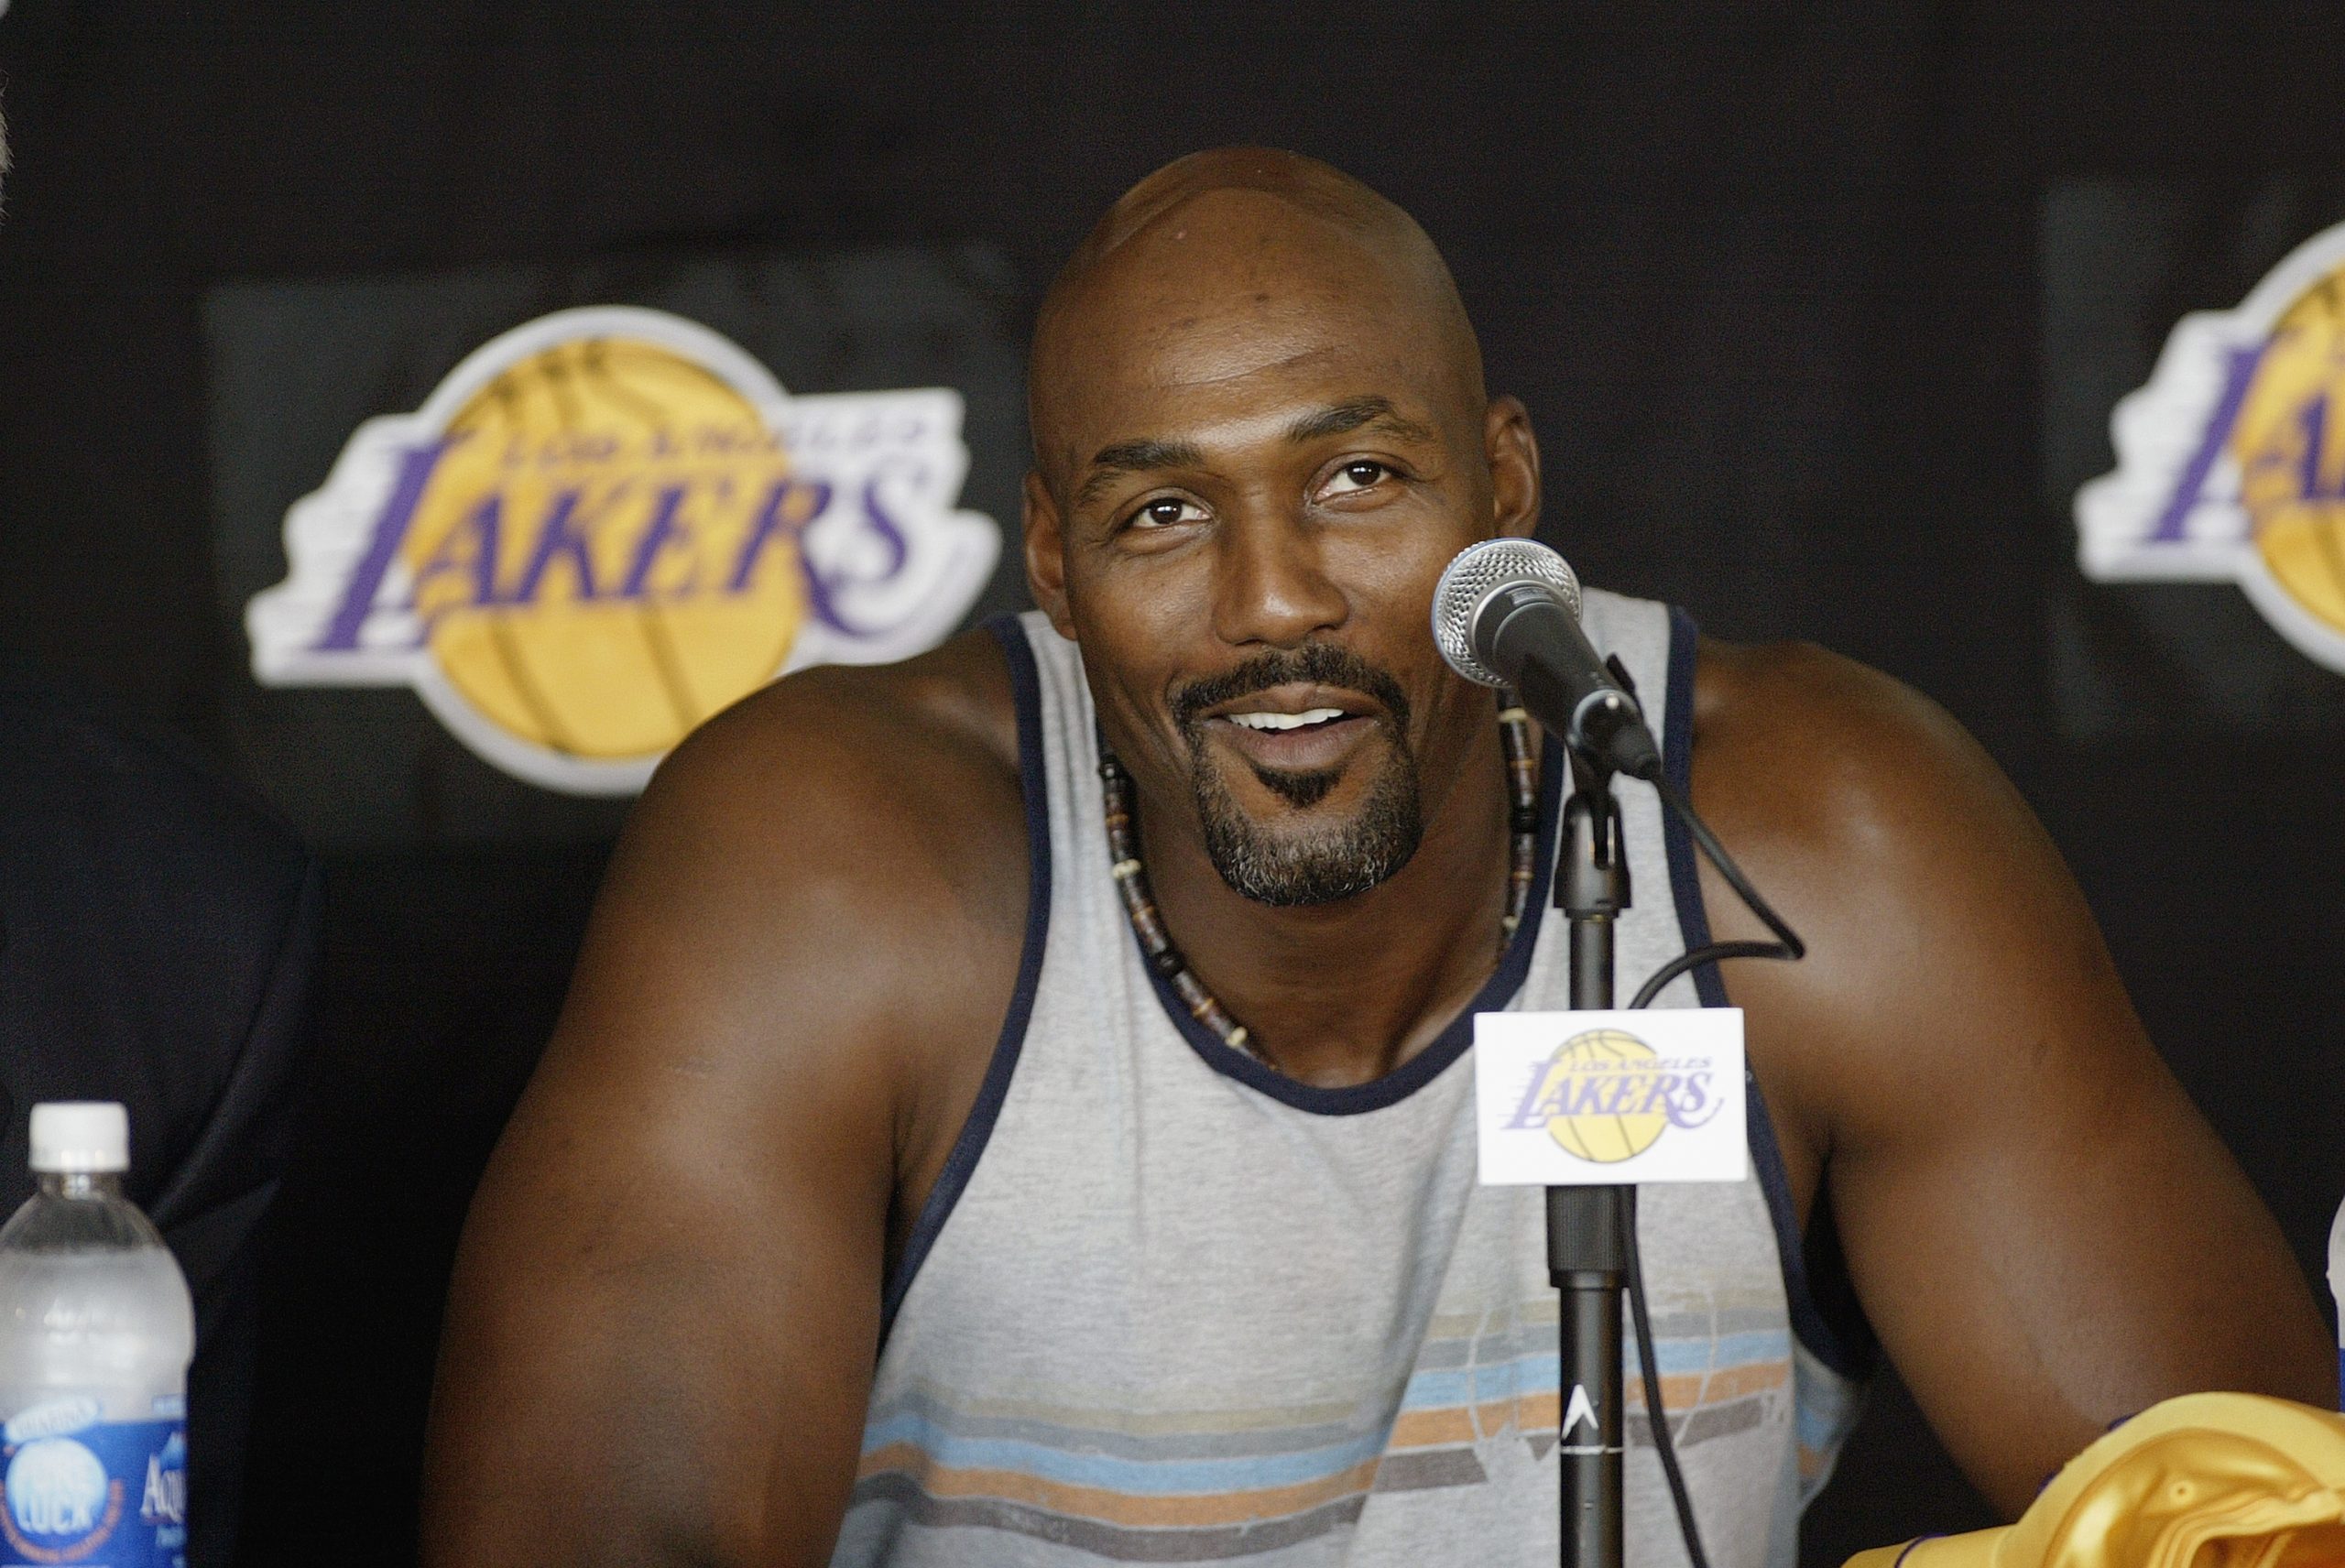 Karl Malone addresses the media during a press conference.